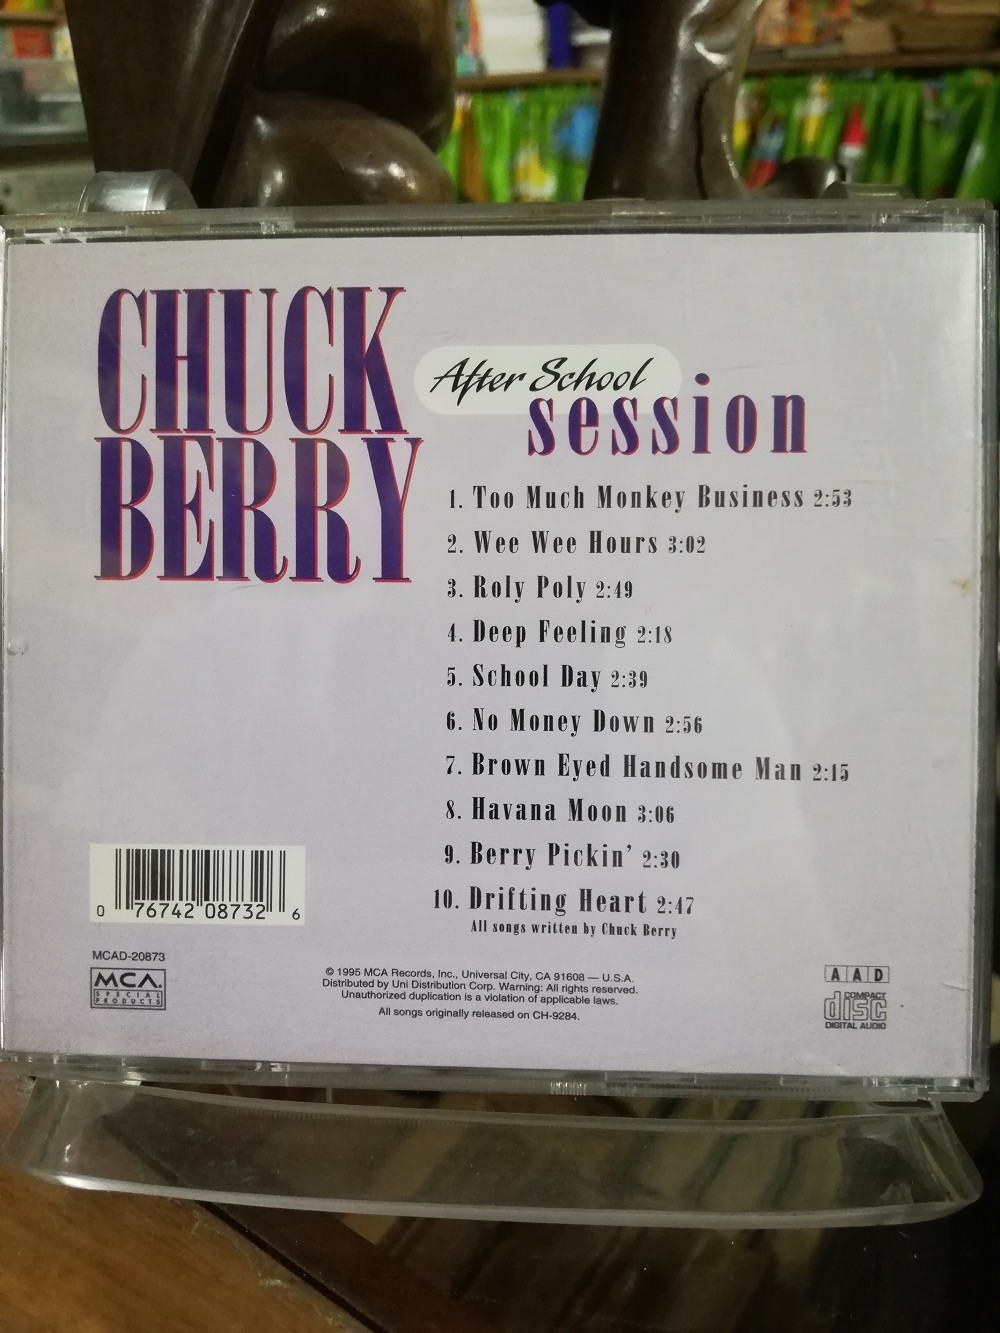 Imagen CD CHUCK BERRY - AFTER SCHOOL SESSION 2